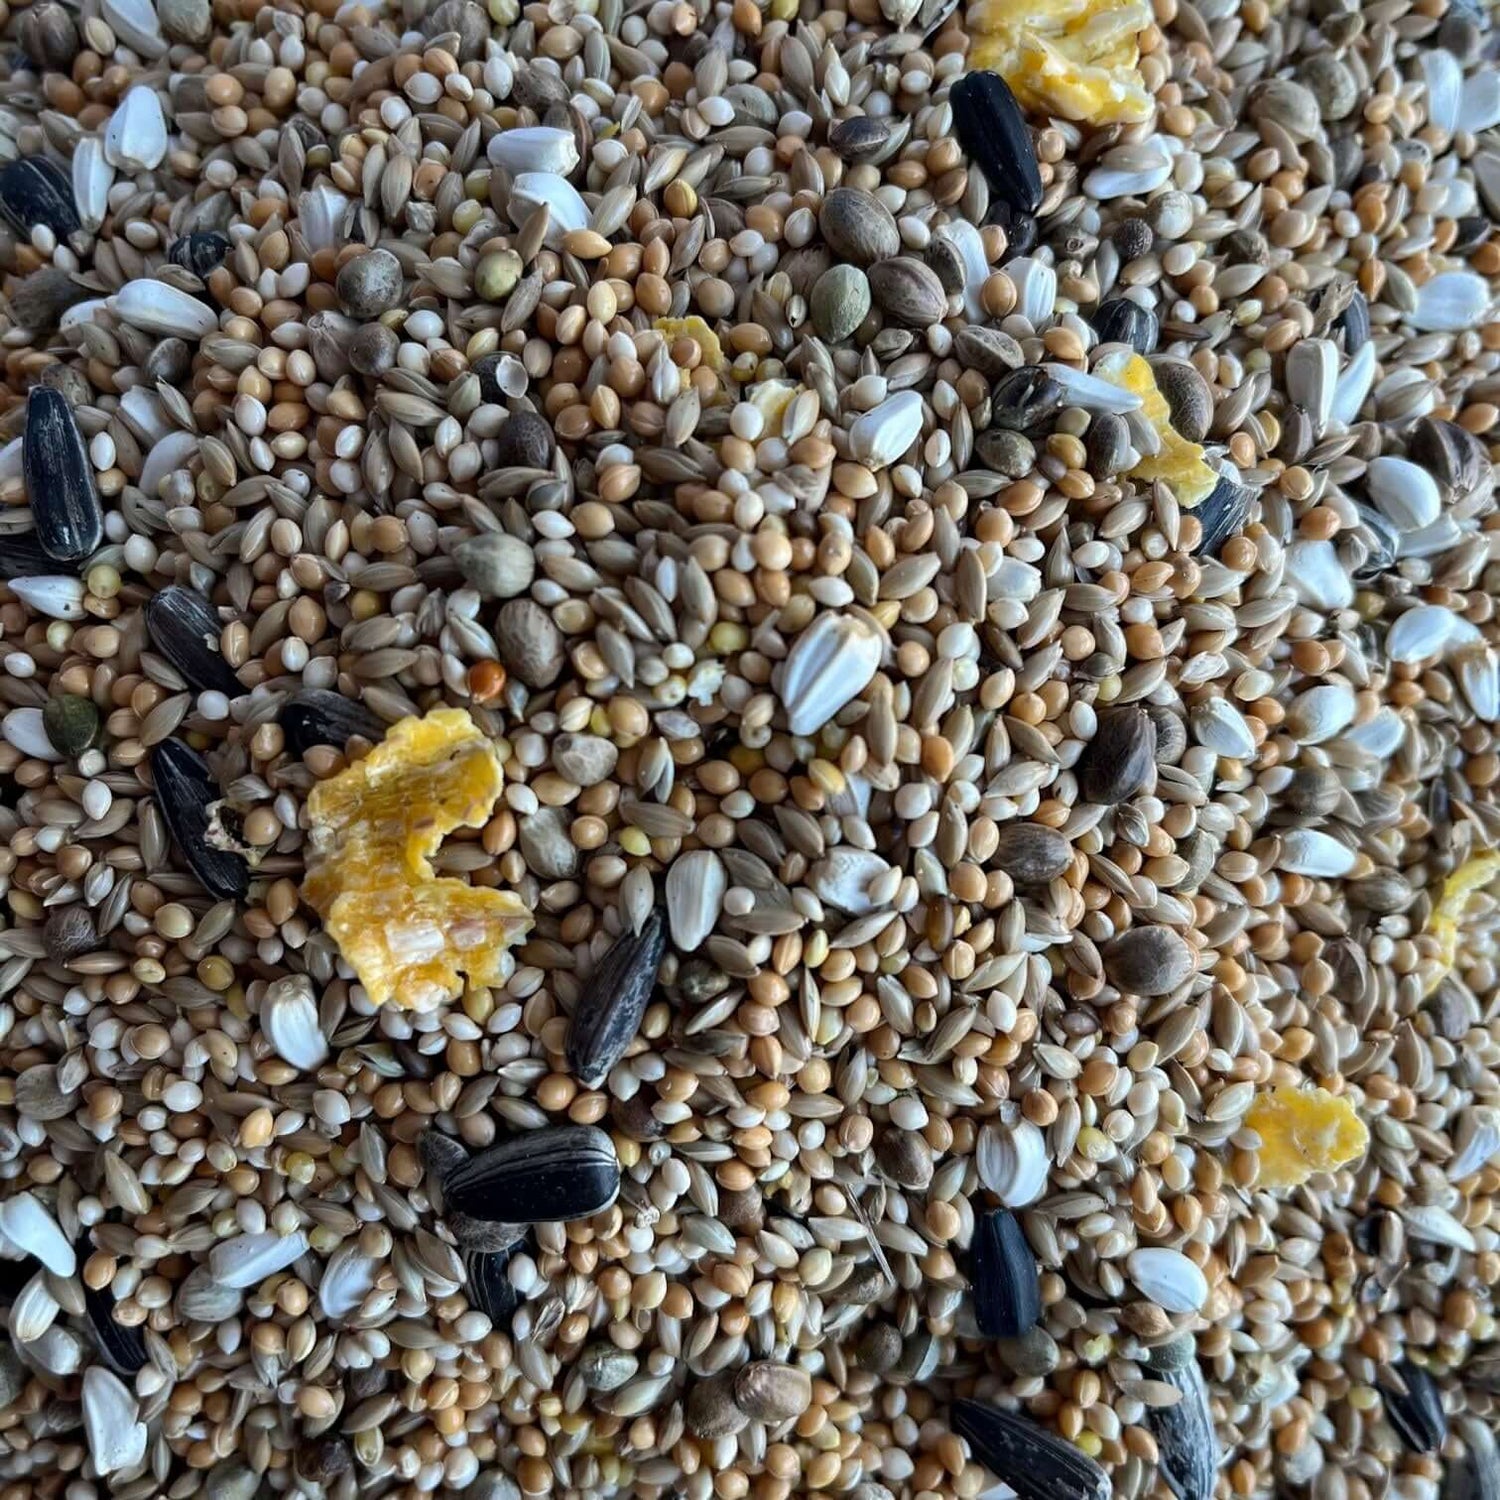 Haith's Lovebird Mix, a staple bird diet based on plain canary seeds, millets and small quantities of sunflower and hempseed.